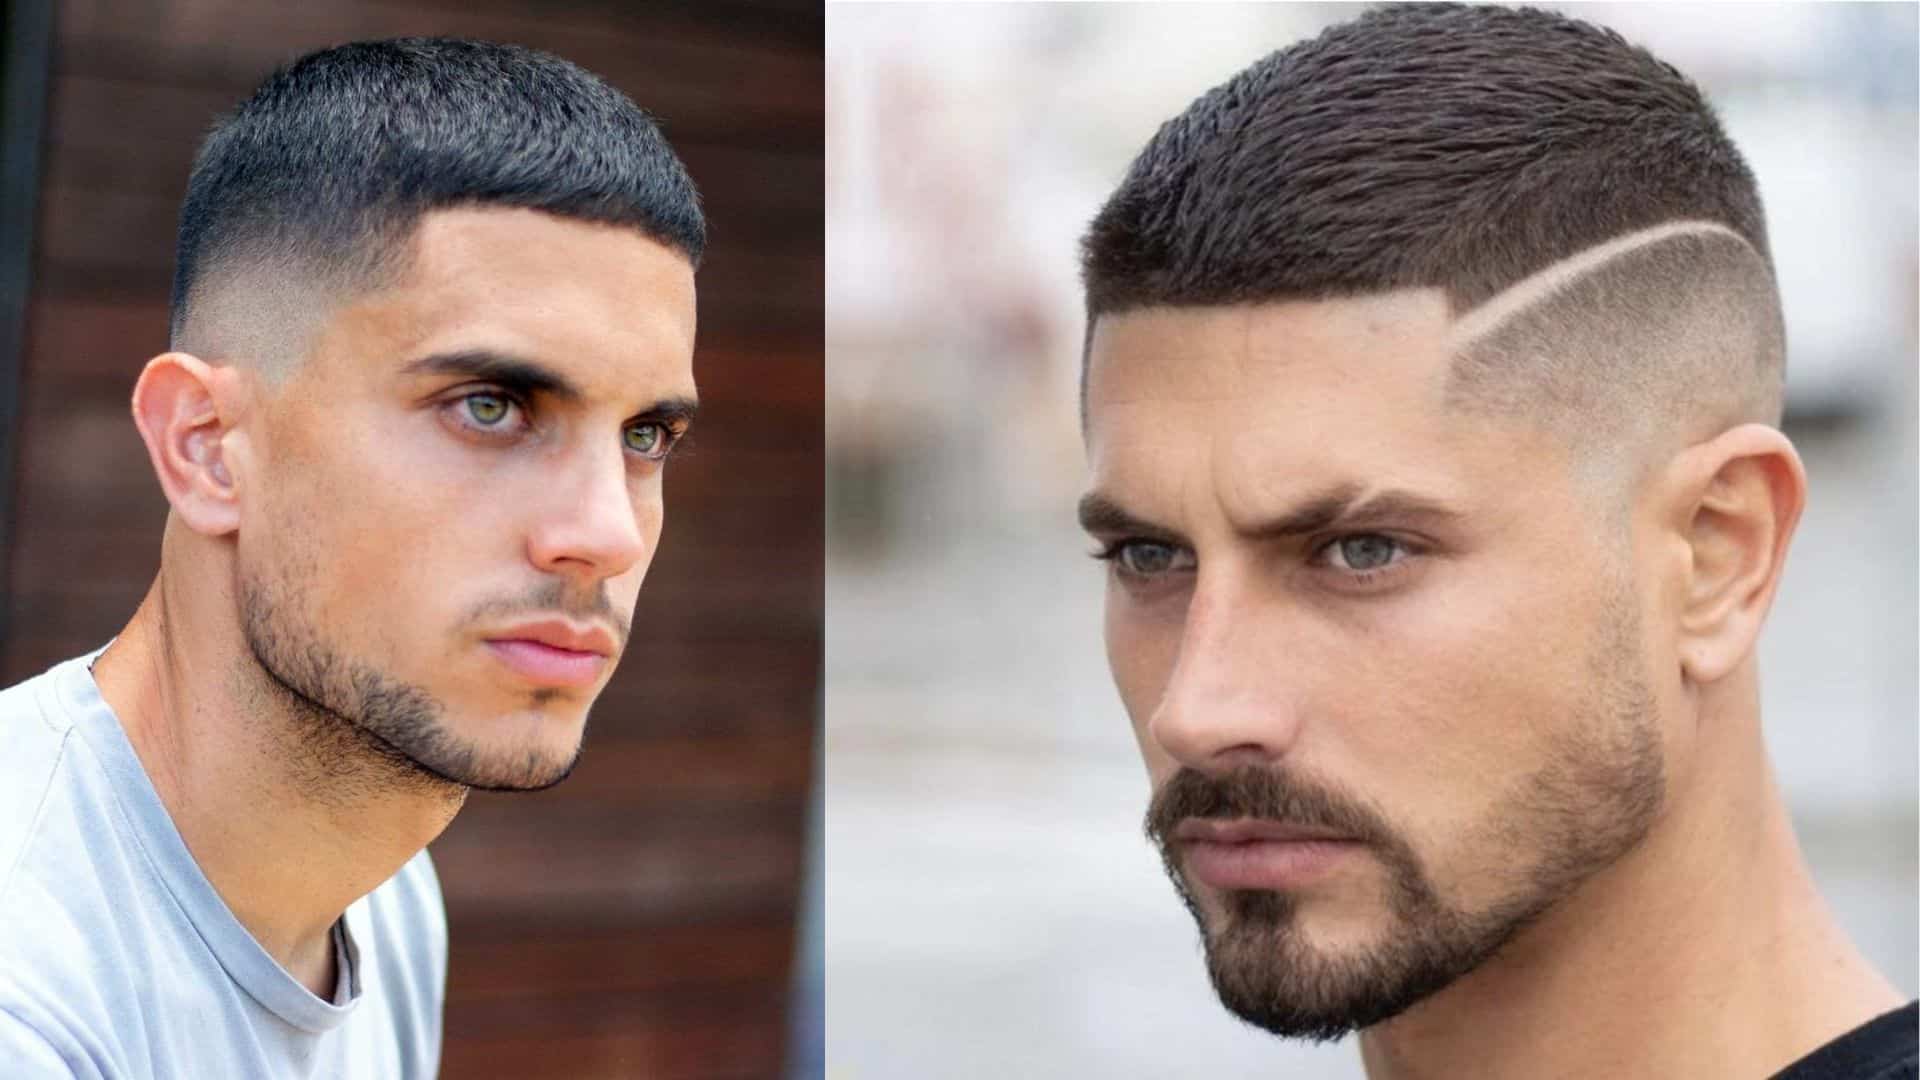 55 Short Haircuts For Men: The Latest Styles For 2023 | Hairstyles for  receding hairline, Mens hairstyles short, Men haircut styles